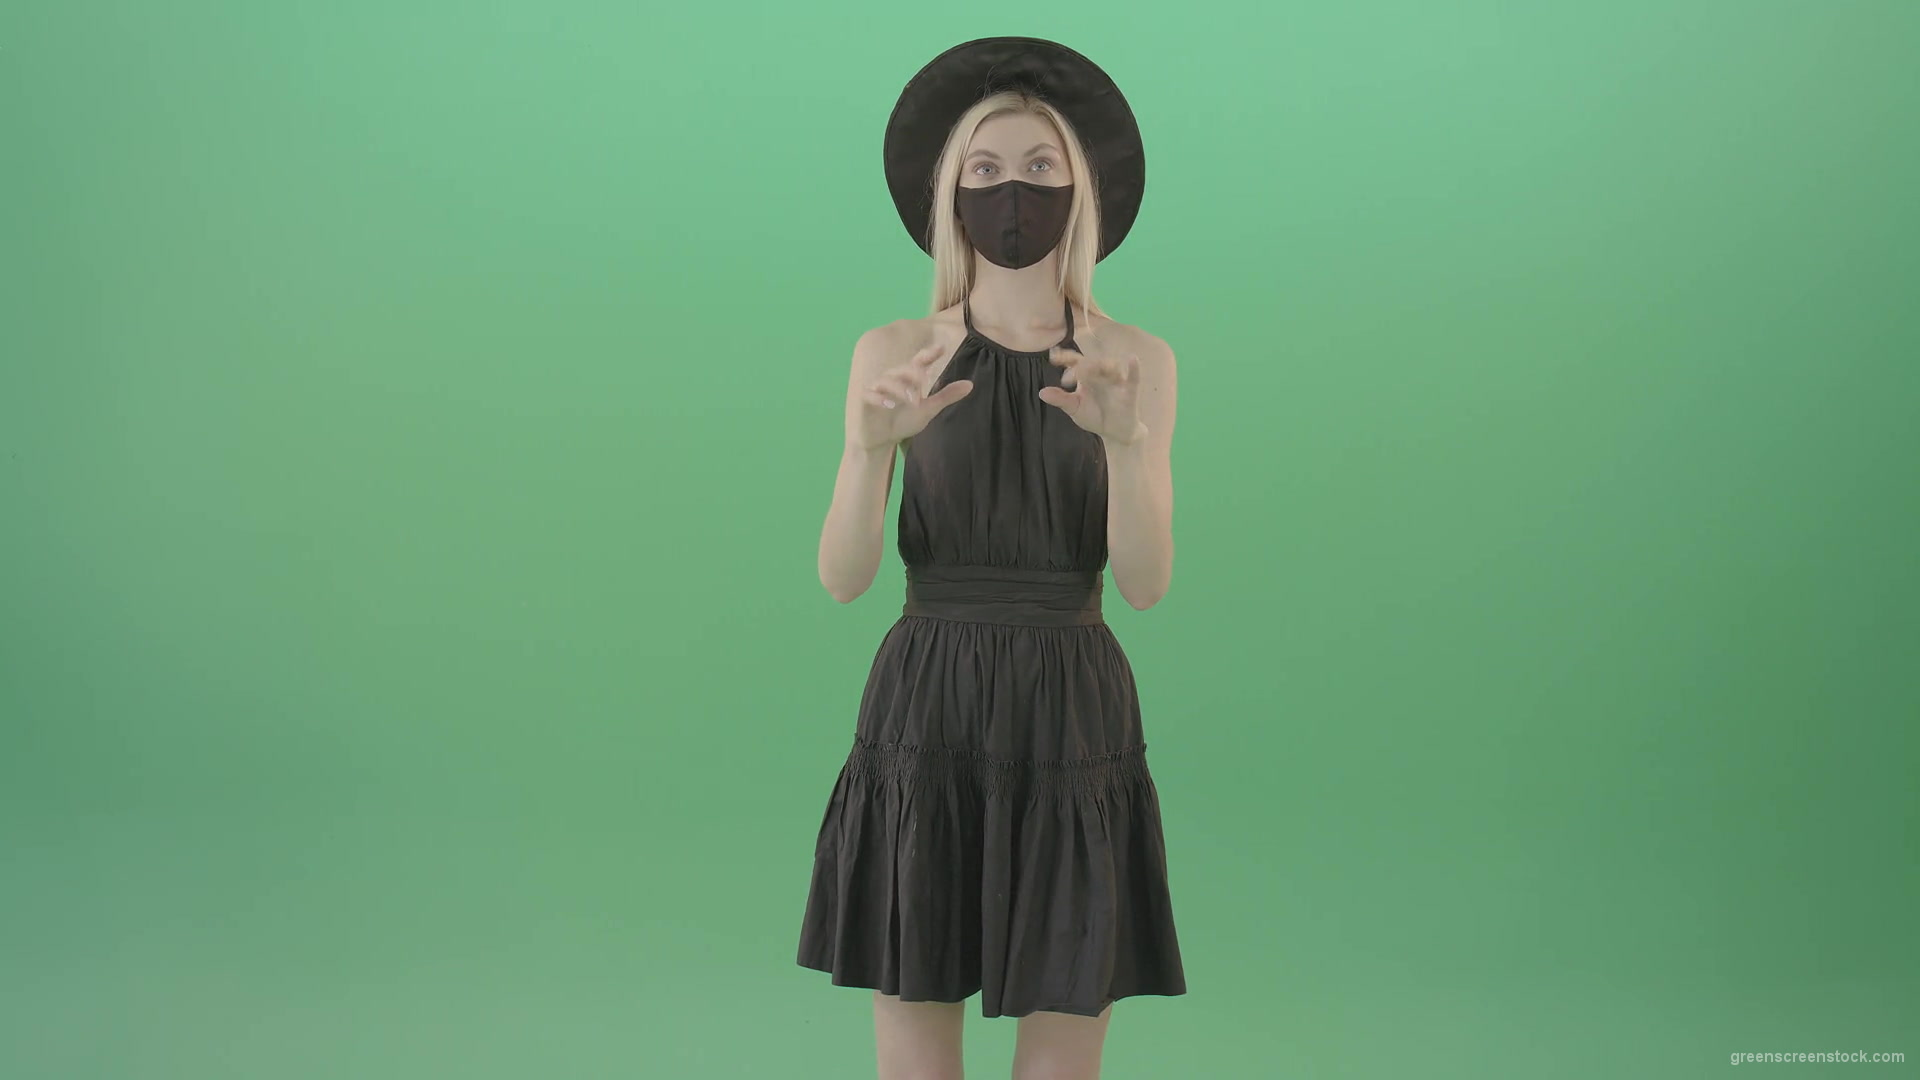 Covid-19-girl-in-black-mask-working-on-virtual-keyboard-buttons-and-touch-screen-on-green-background-4K-Video-Footage-1920_002 Green Screen Stock